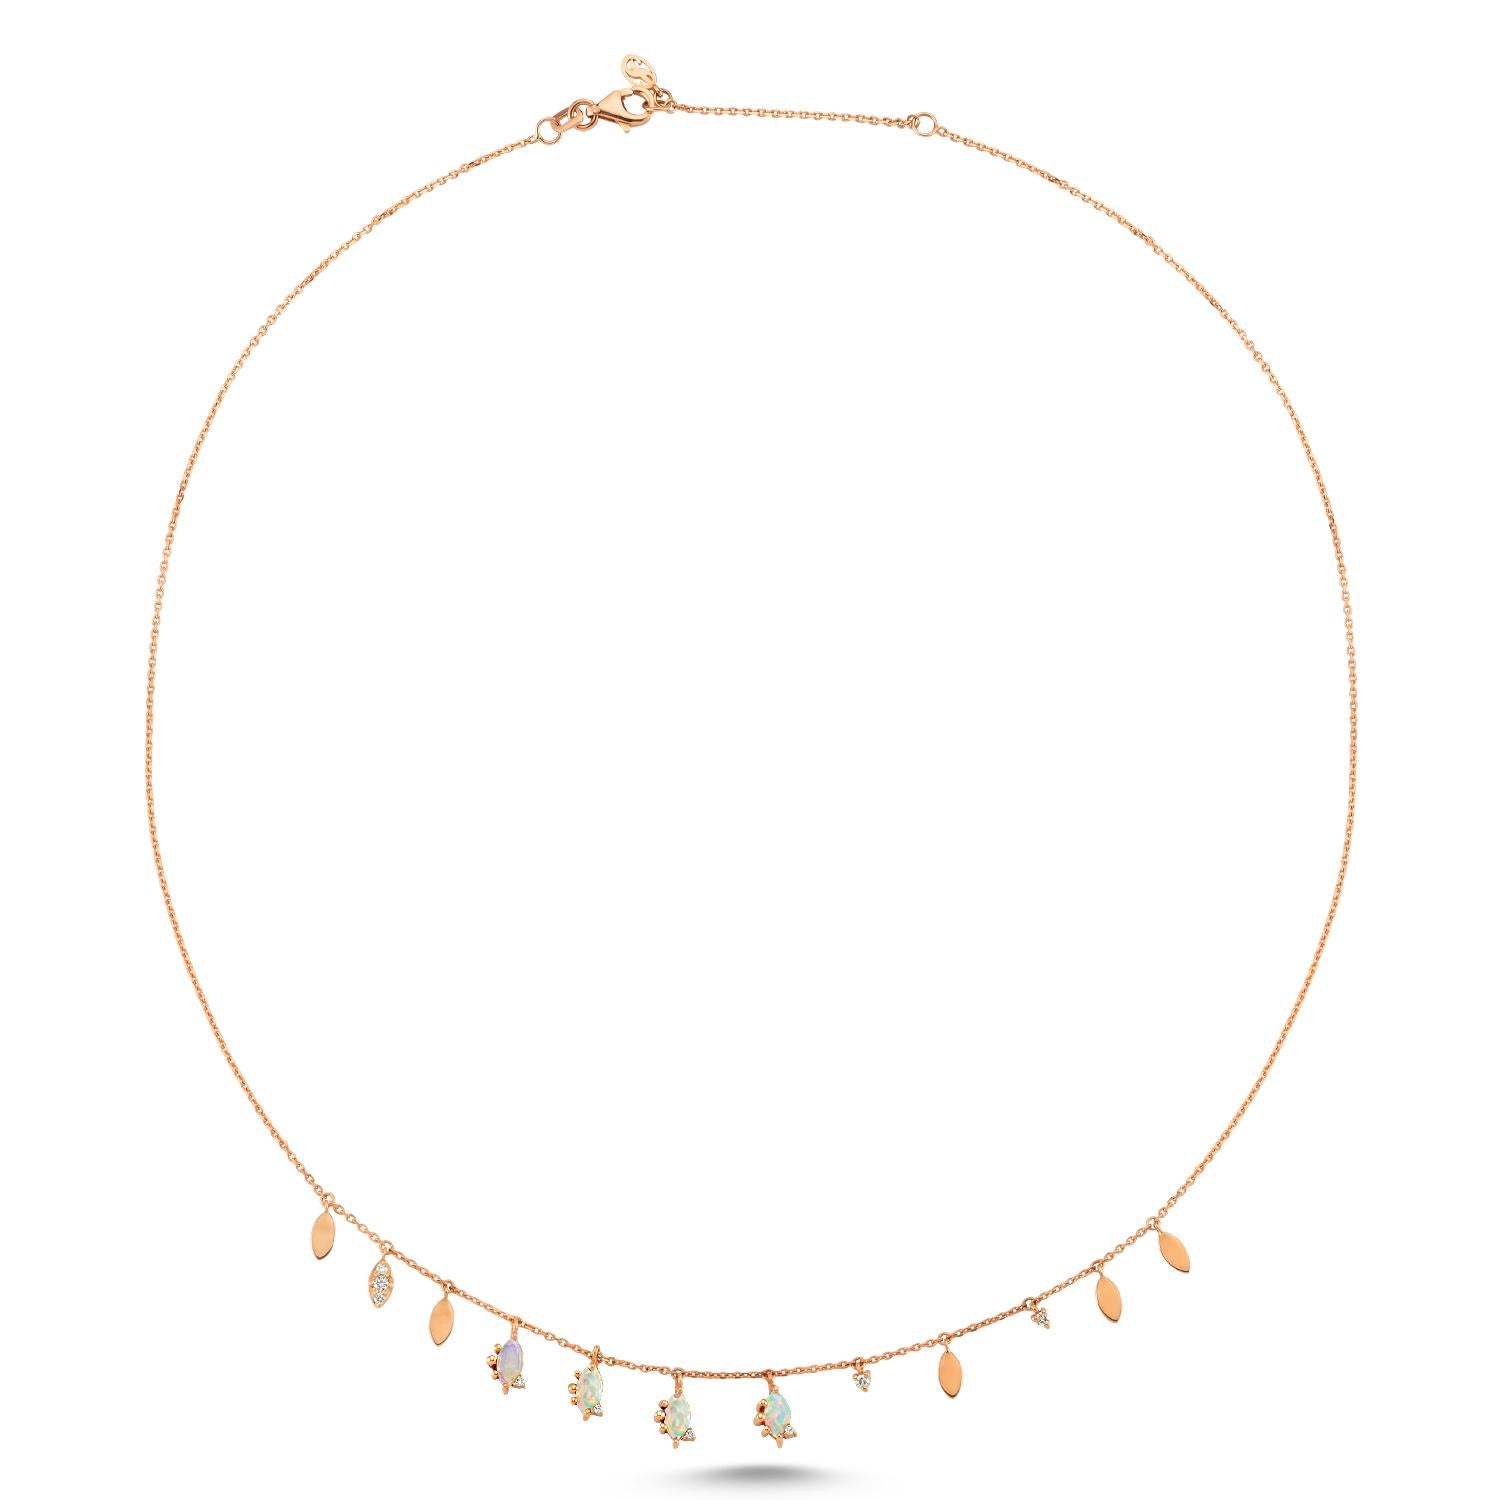 Cacia seed necklace- marquise cut white opal in 14k rose gold by Selda Jewellery

Additional Information:-
Collection: Treasures of the sea collection
14K Rose gold
0.09ct White diamond
0.44ct Marquise cut opal
Chain length 40+3cm